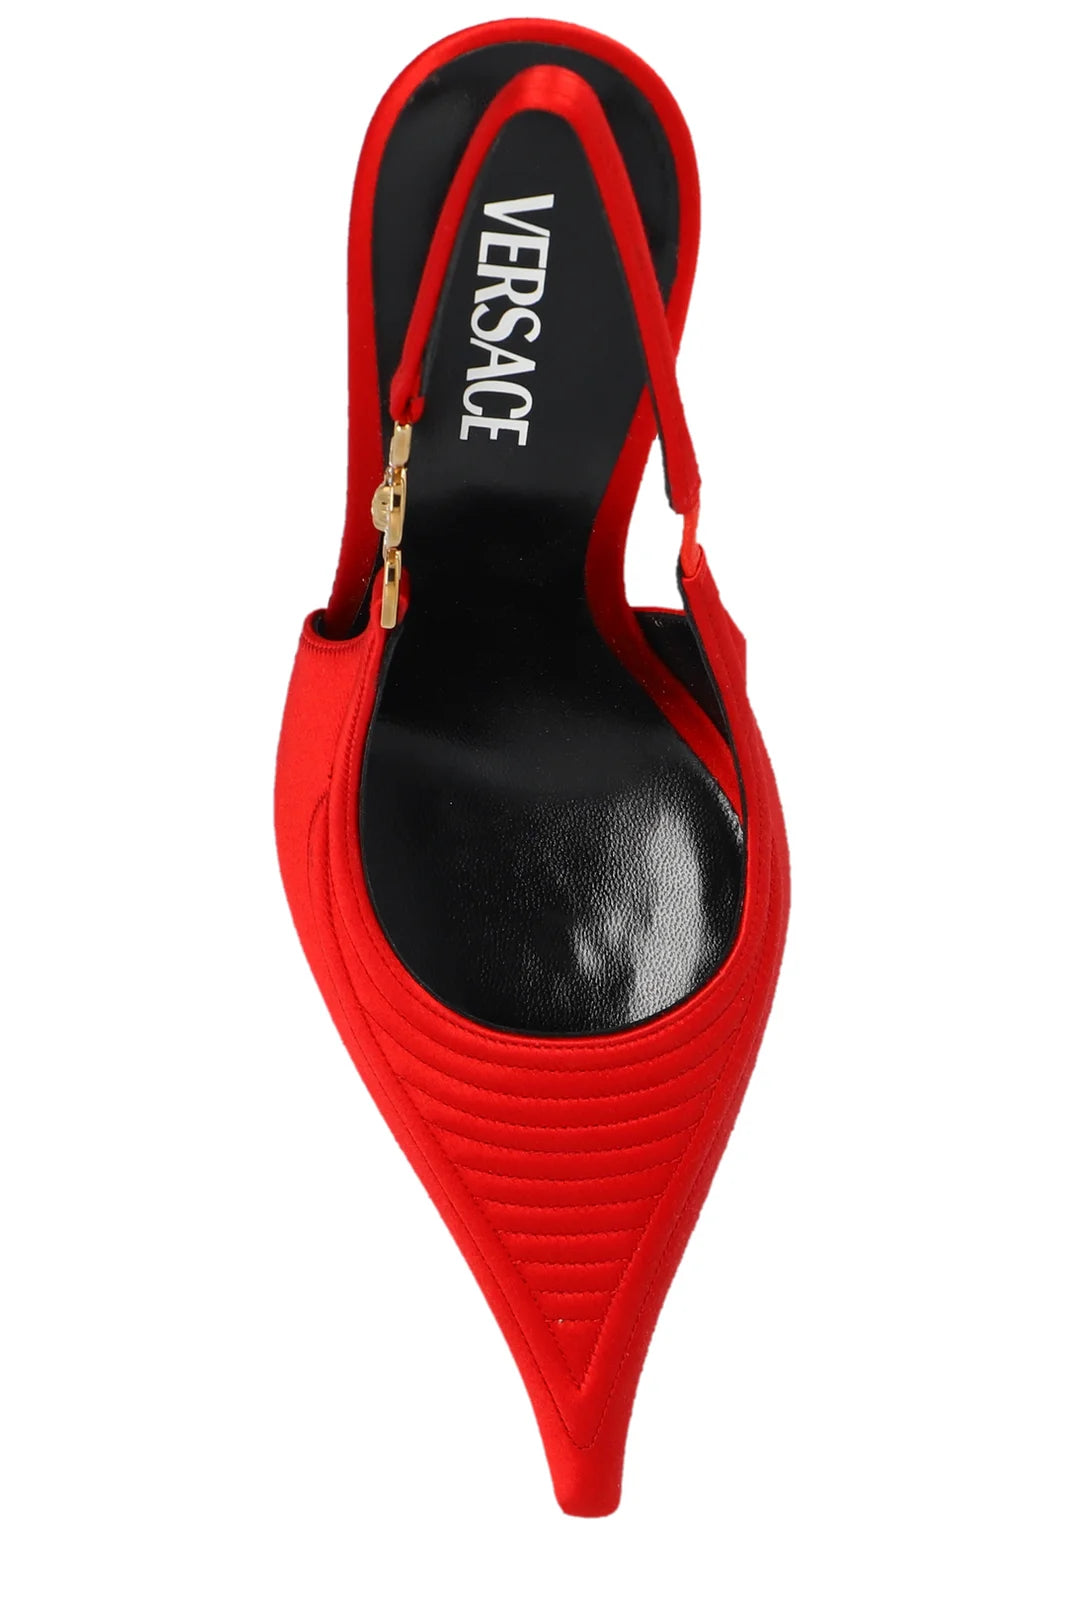 Versace Shoes for Rent - Versace Medusa 95 Pointed Toe Slingback 